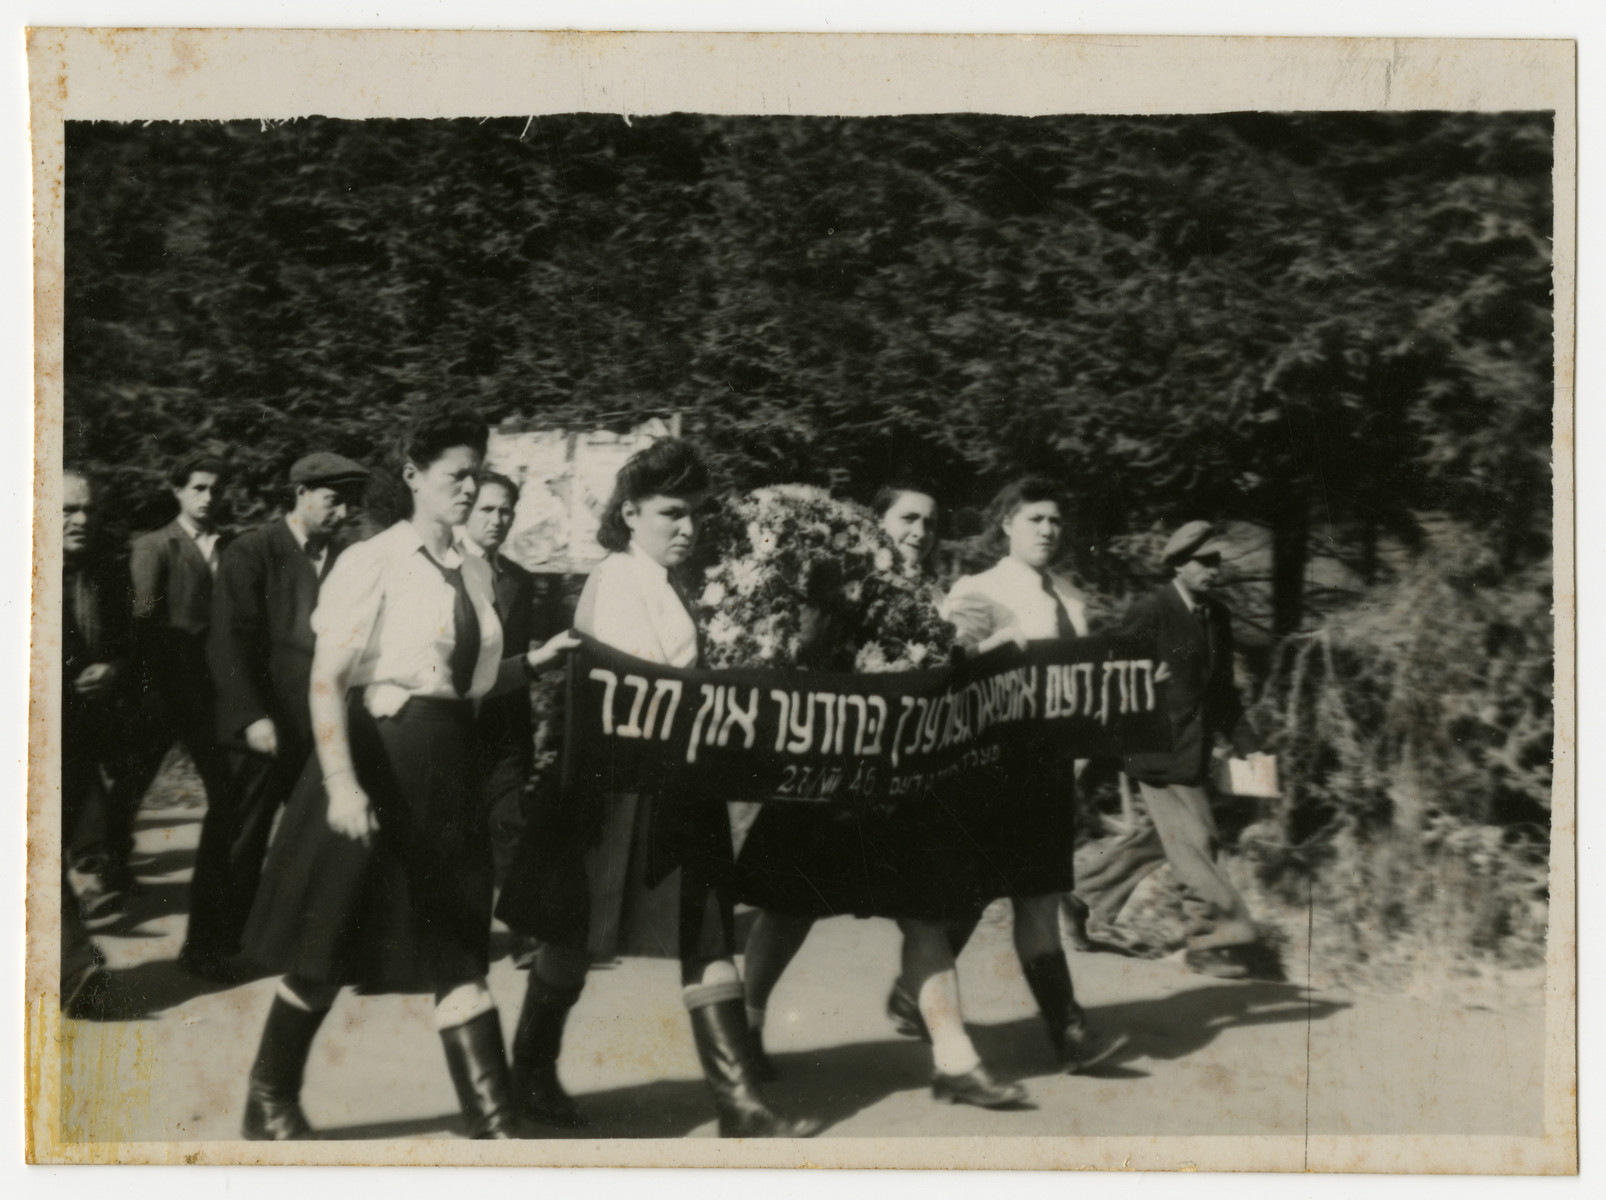 Women march in a funeral procession carrying a banner in memory of their "brother and friend"

This is possibly the funeral for David Kabesicki.  Among those pictured are Rifka Krasner (second from the left) and Jenta Szapiro (third from the left).